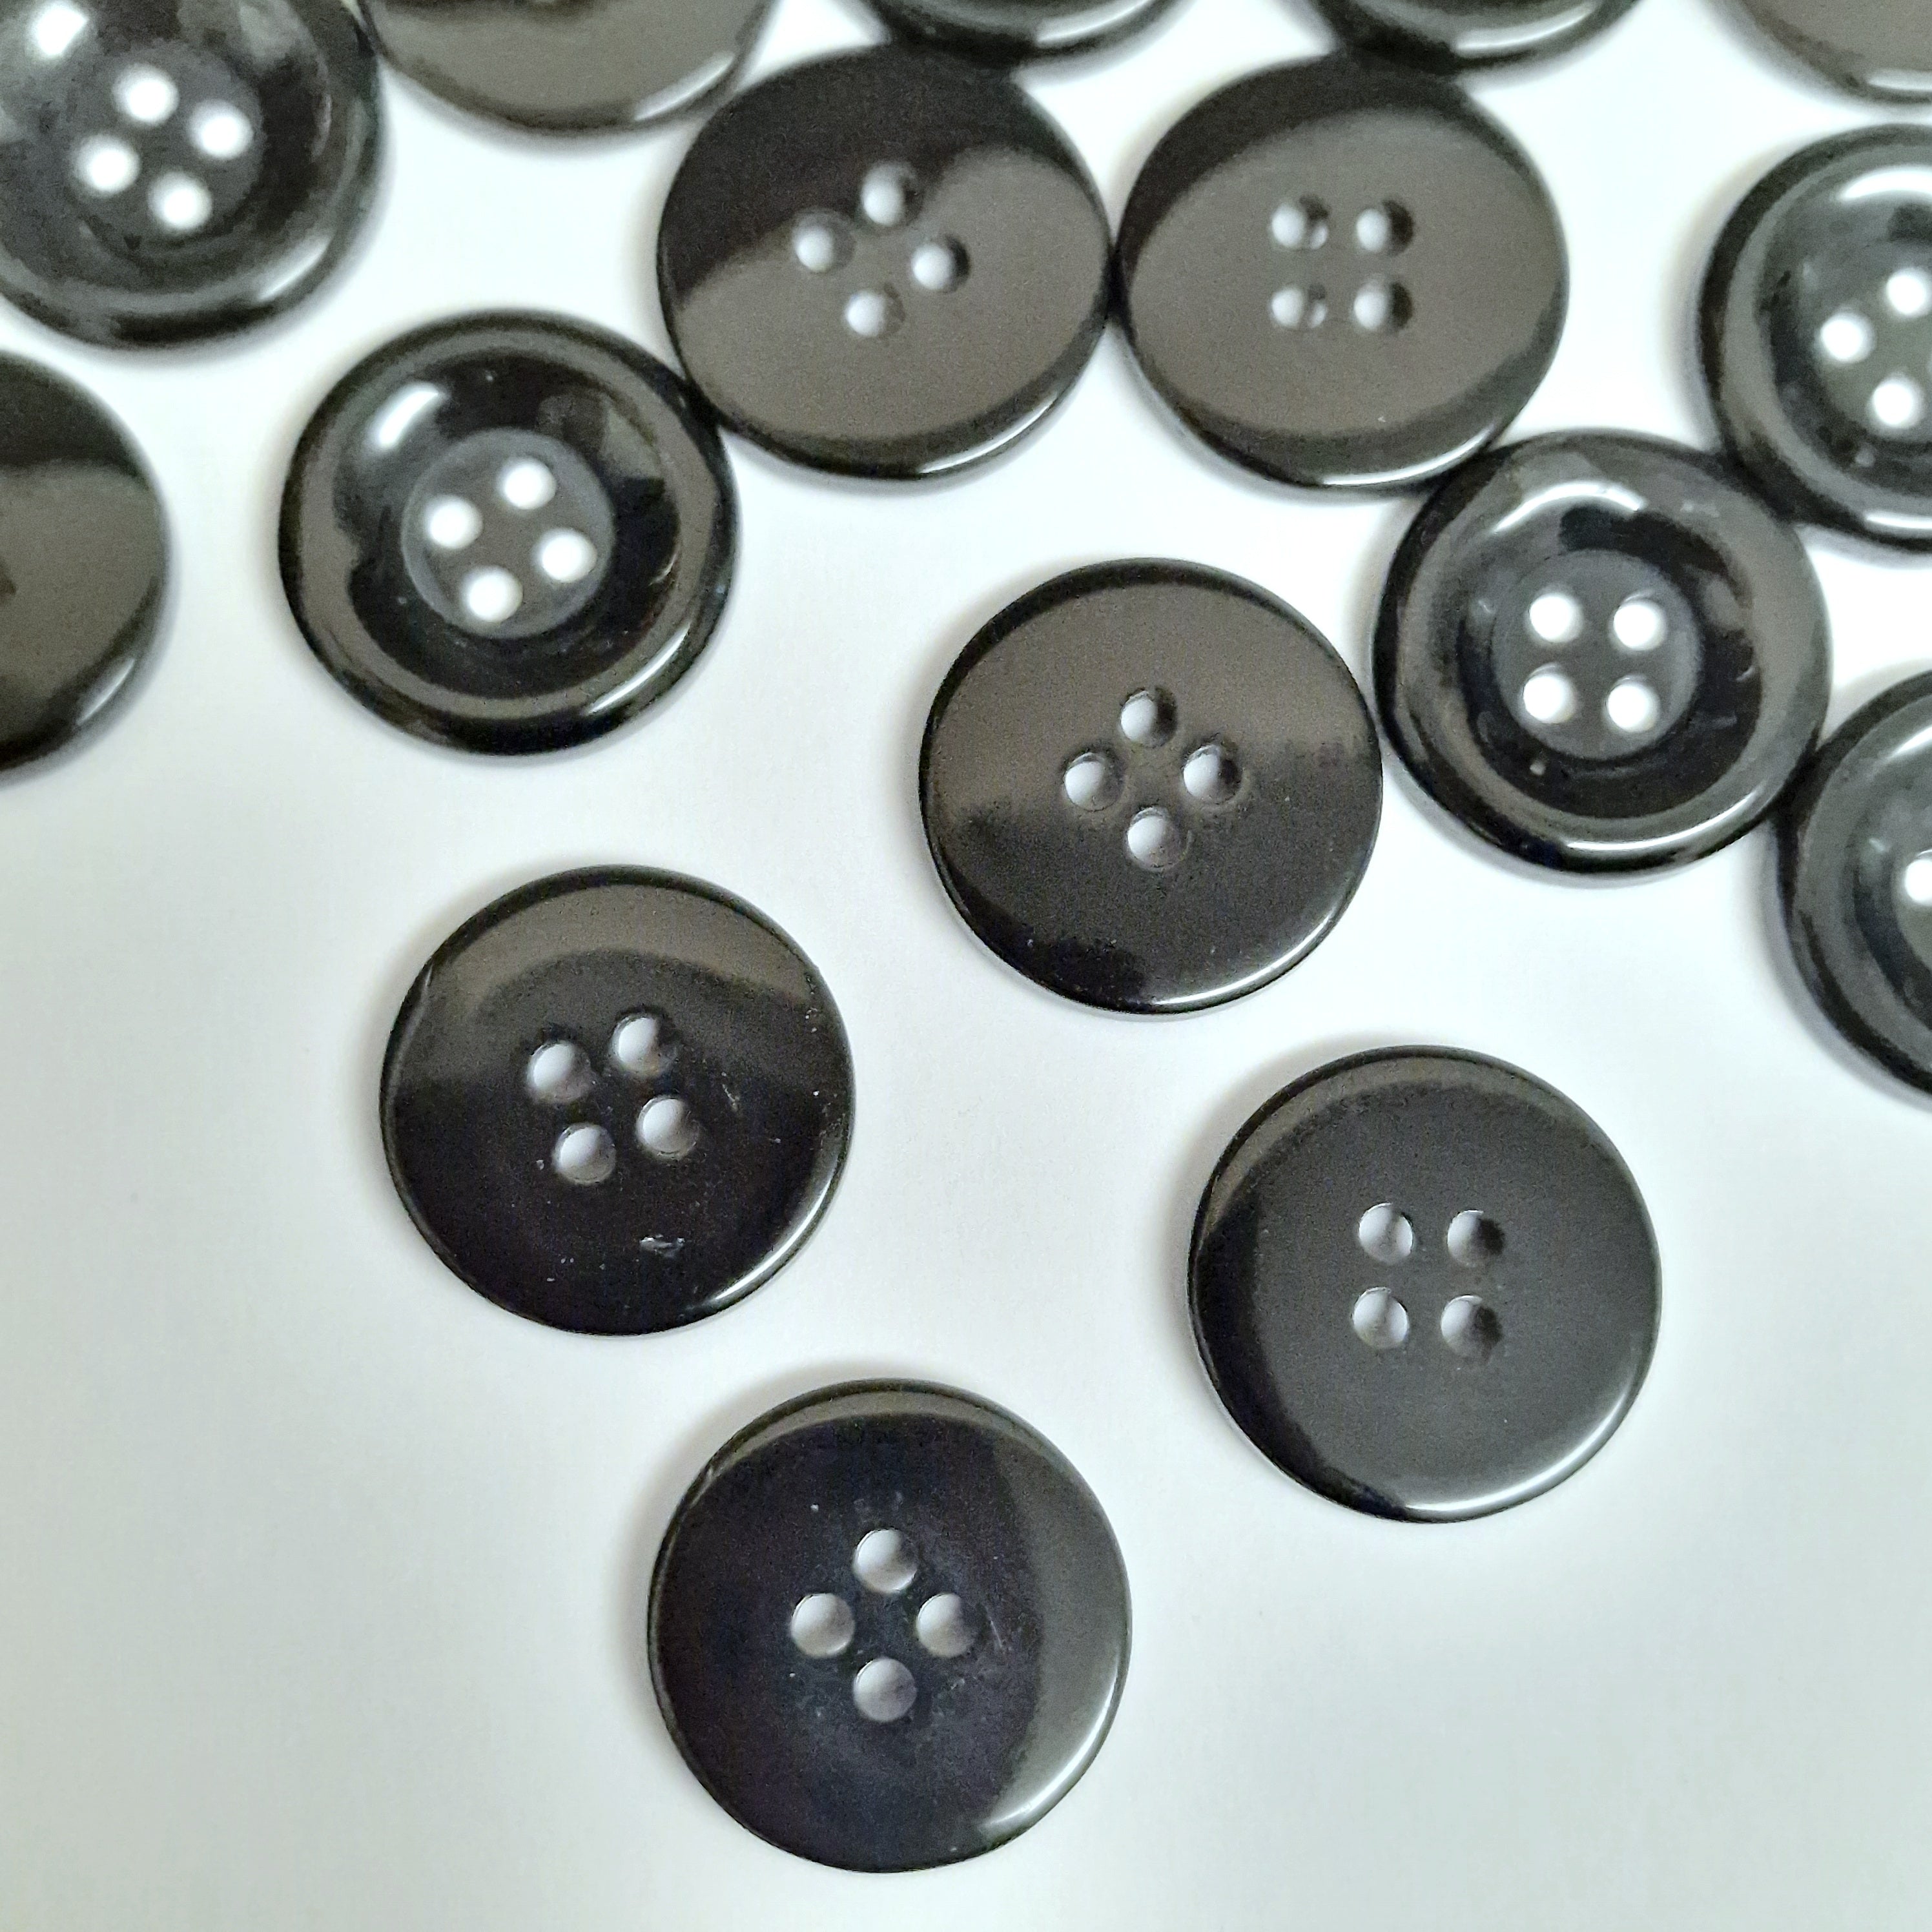 MajorCrafts 48pcs 15mm Black 4 Holes Thick Edge Round Resin Sewing Buttons